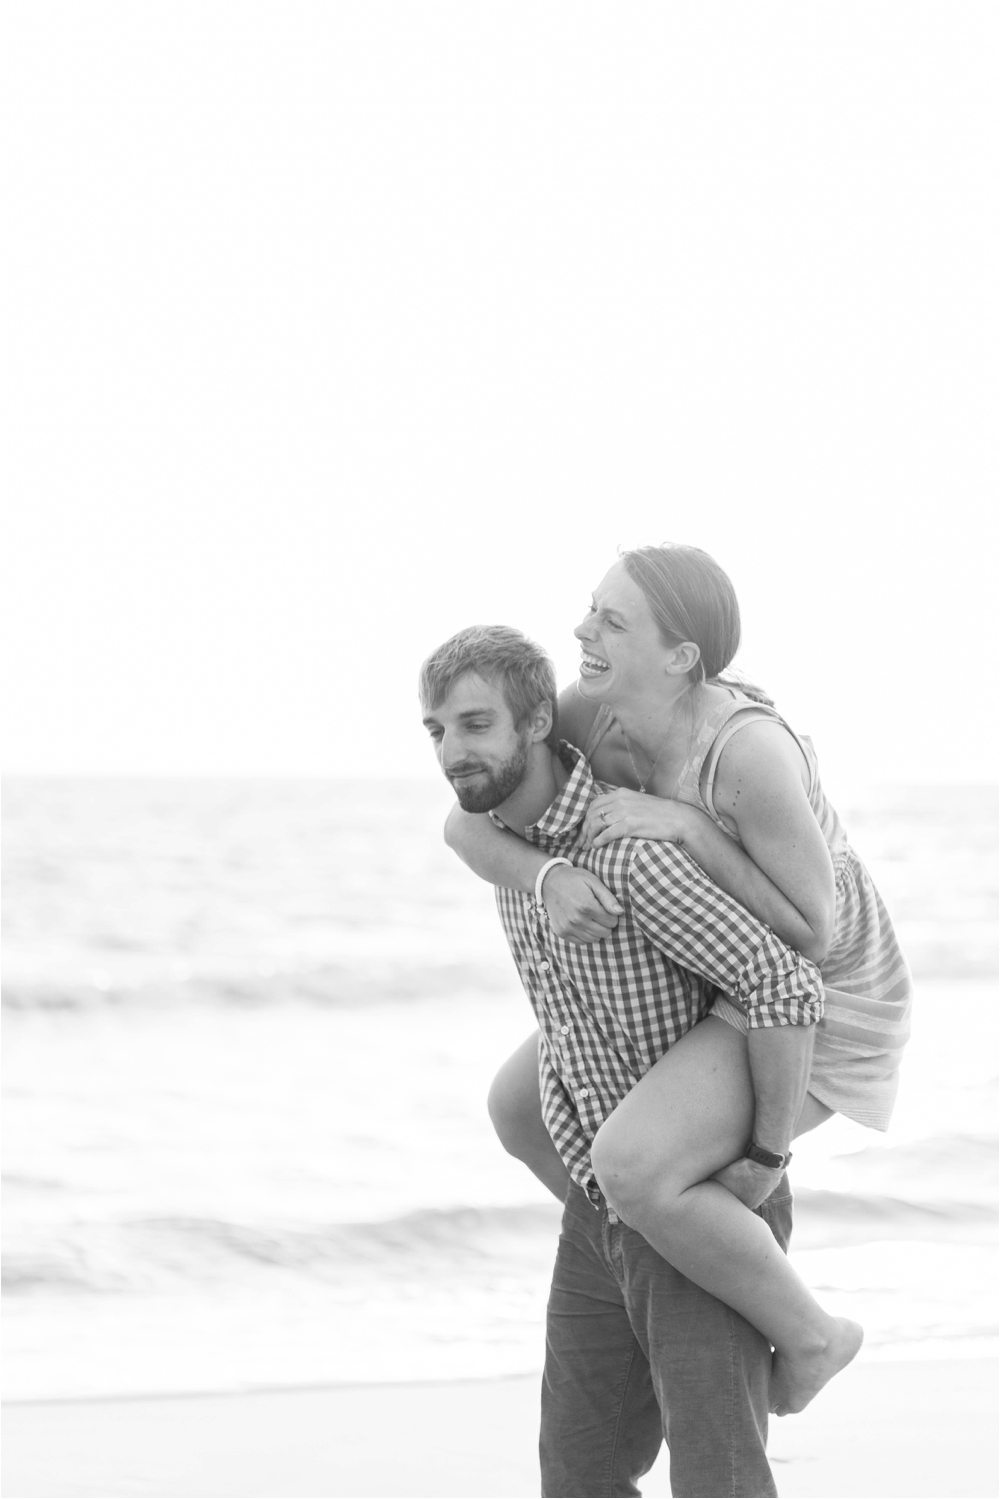 dauphin island albama engagement photography session jennie tewell photography 0011